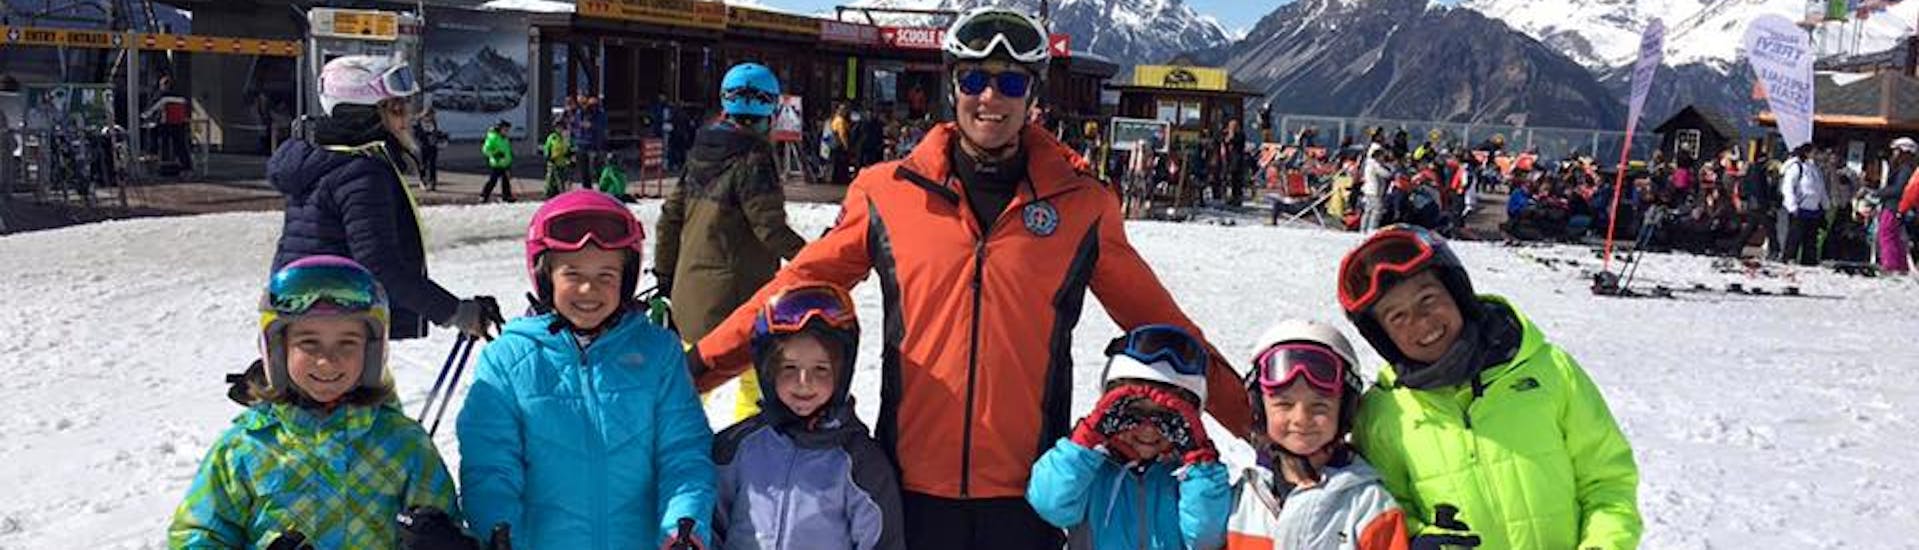 Ski instructor with children in Bormio ready for one of the Kids Ski Lessons (6-12 y.) for All Levels - Half Day.